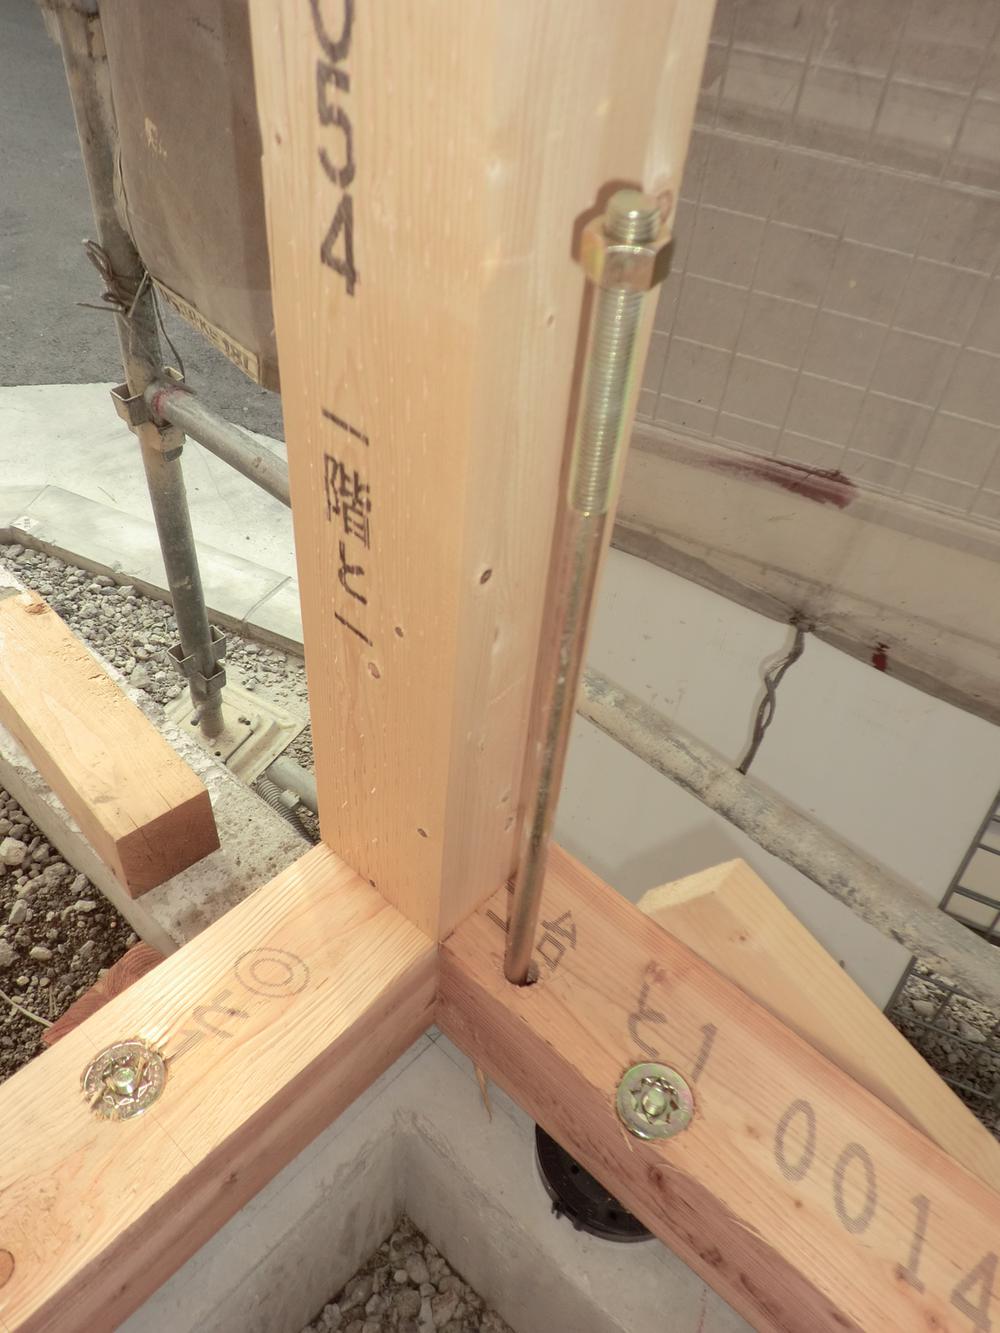 Other Equipment. Foundation ・ Foundation ・ Select the right man in the right place seismic hardware for each joint, such as pillars, Firmly Tightened the structure. Prevent the building of distortion and collapse from the shaking caused by an earthquake, It has extended the durability of the whole house.